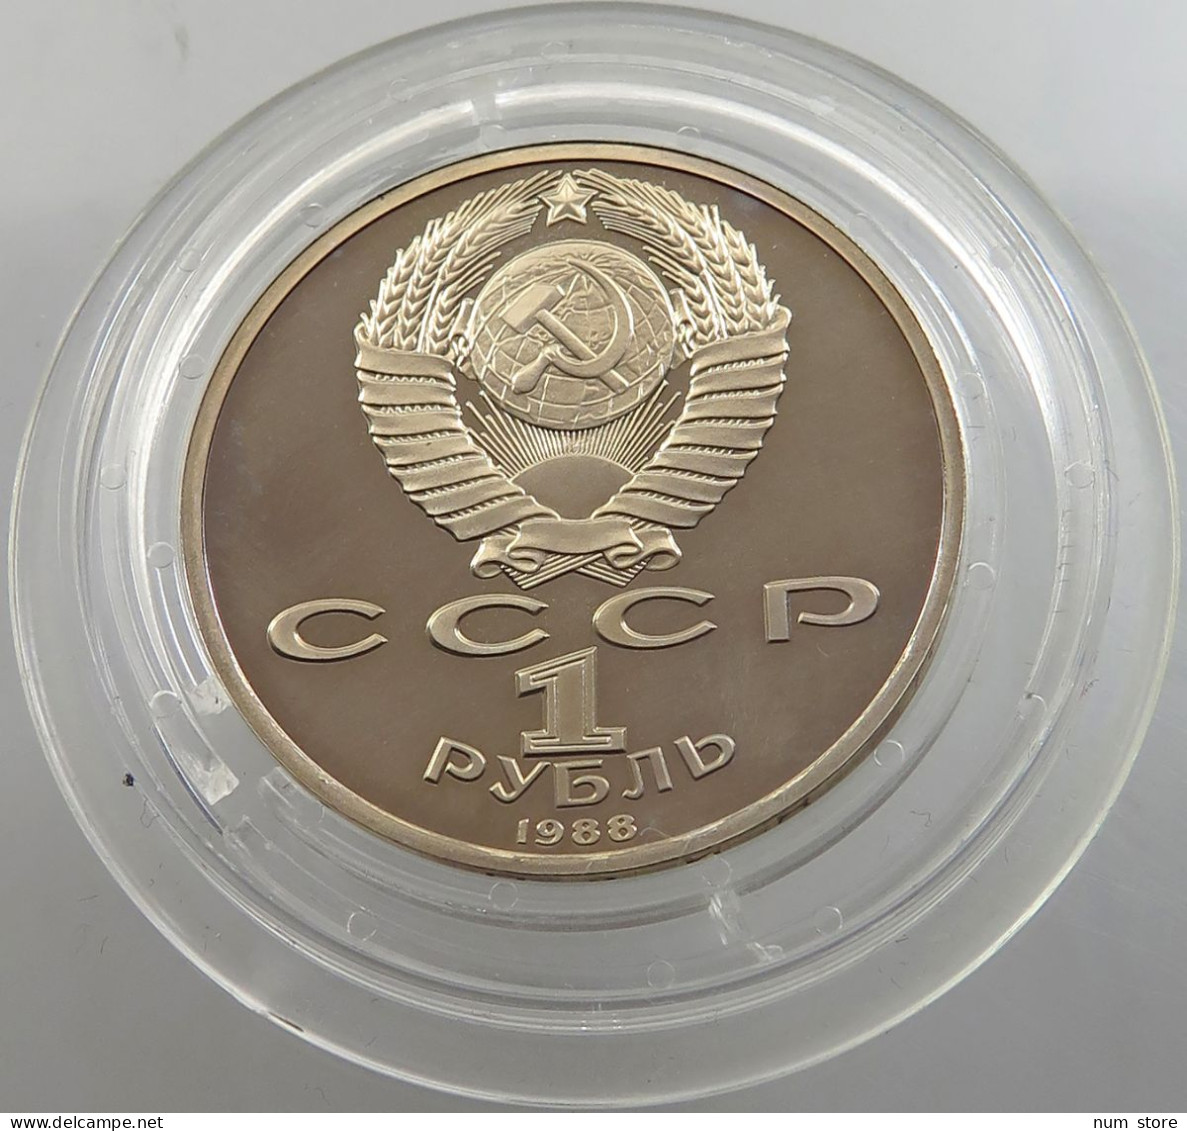 RUSSIA USSR 1 ROUBLE 1988 GORKI PROOF #sm14 0327 - Russland